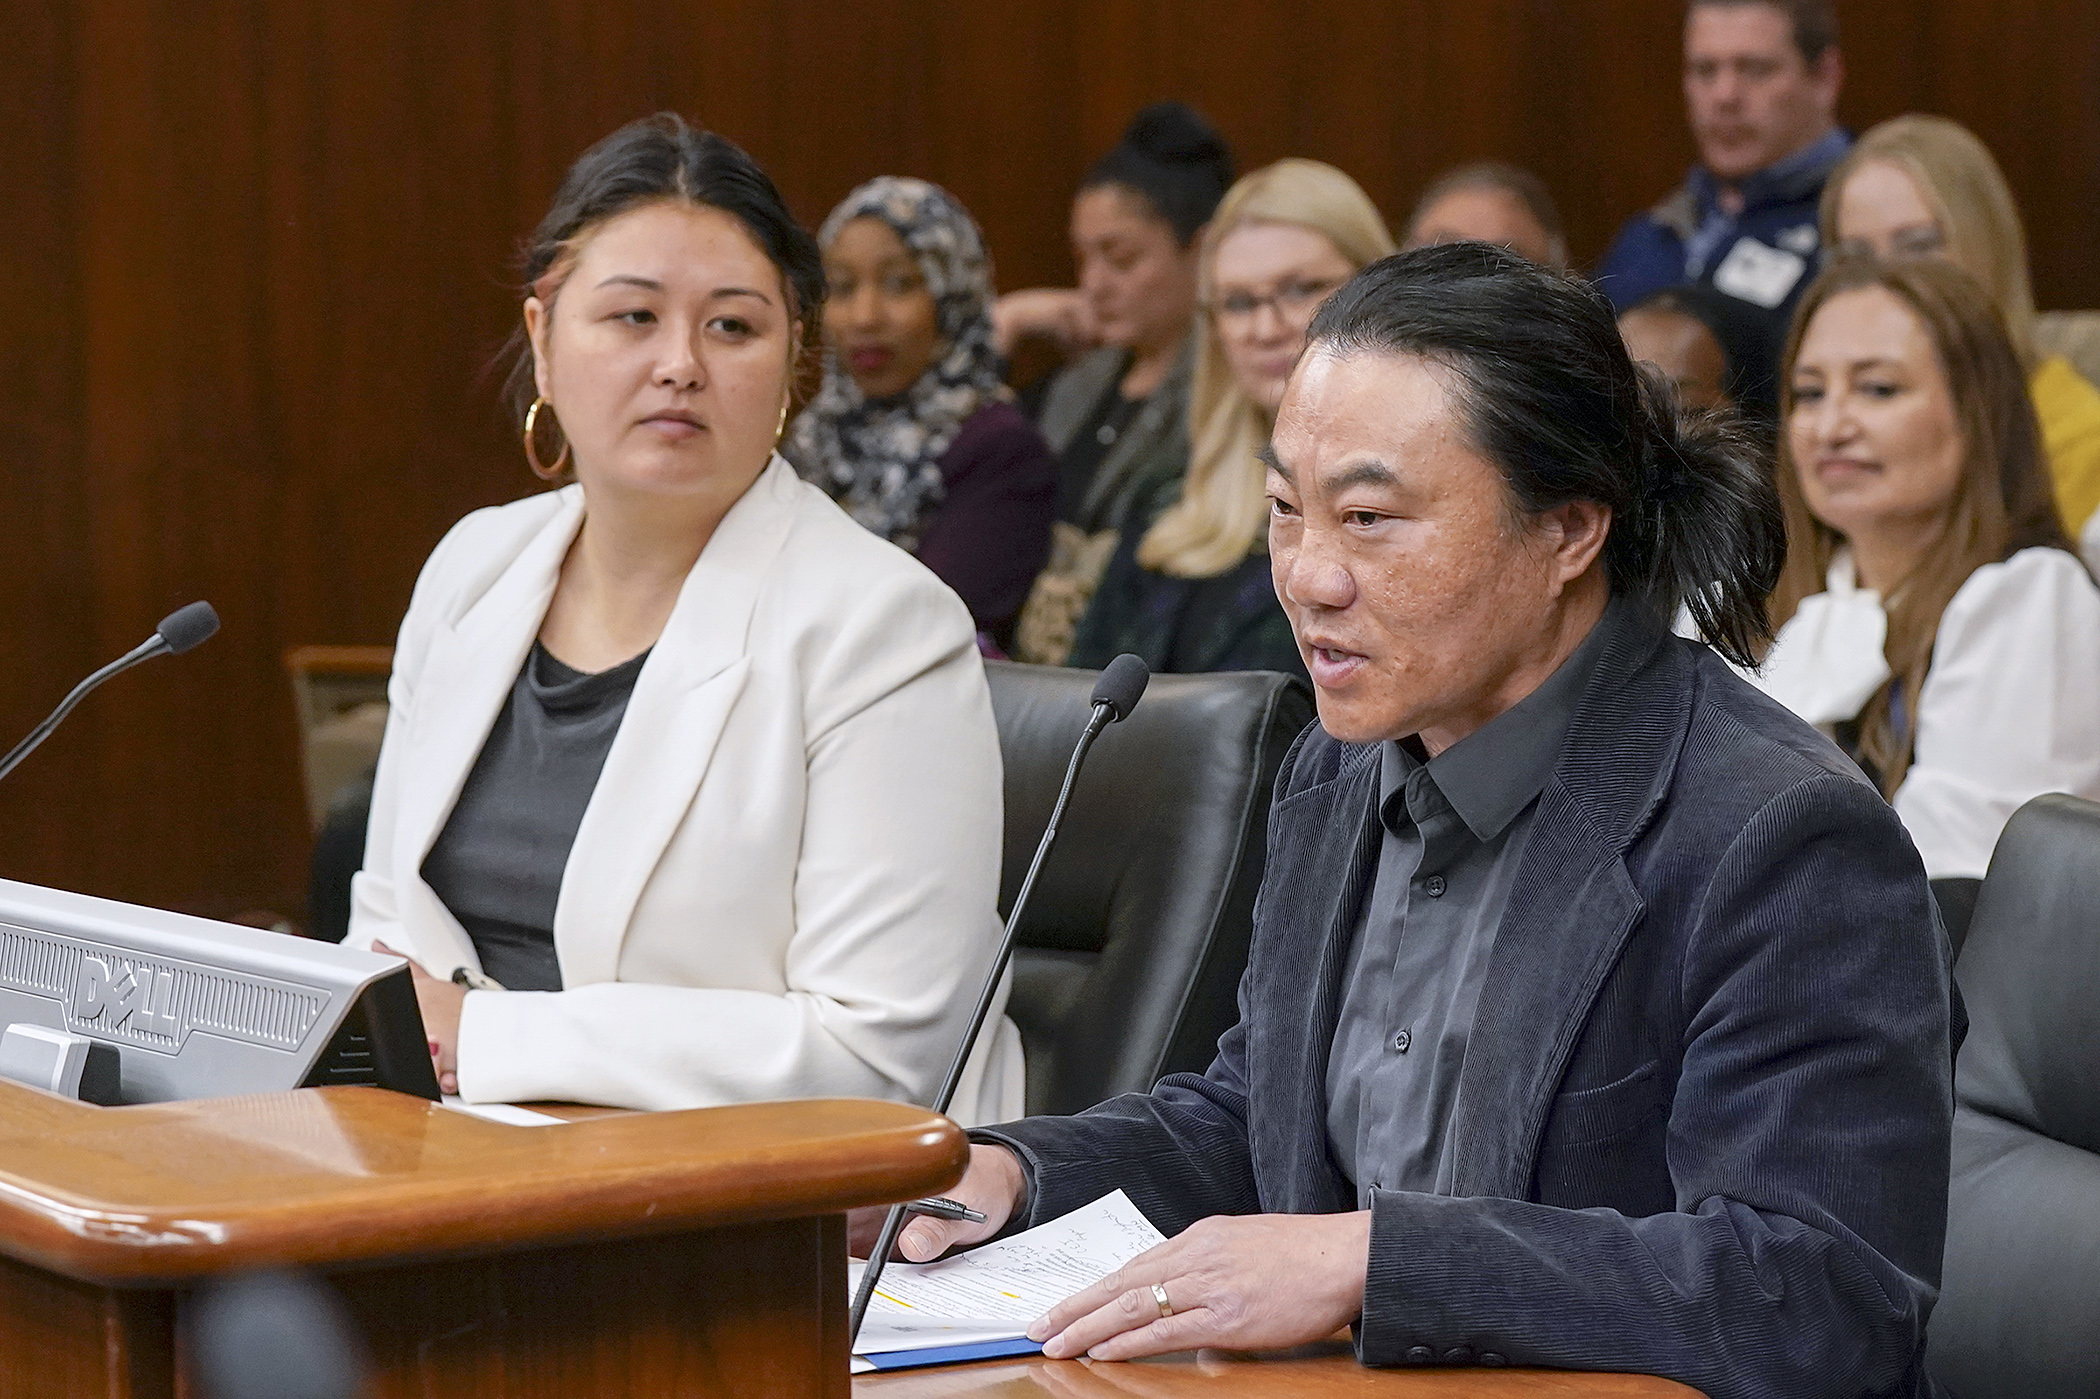 Vayong Moua, director of racial and health equity advocacy for Blue Cross and Blue Shield of Minnesota, testifies March 20 in support of a bill to establish a way to request a racial equity impact note for proposed legislation. (Photo by Michele Jokinen)